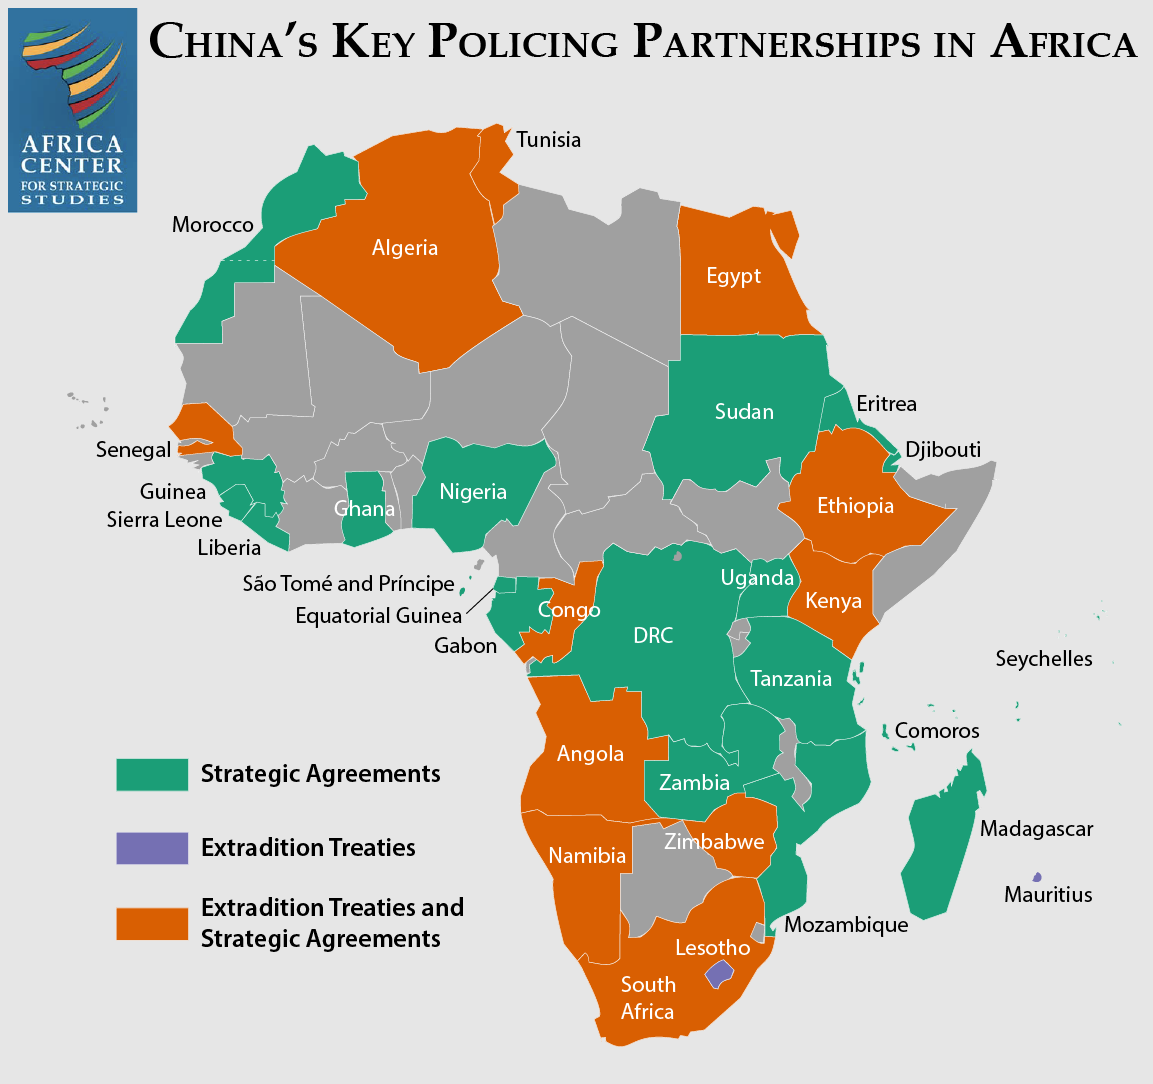 Map of China's Key Policing Partnerships in Africa